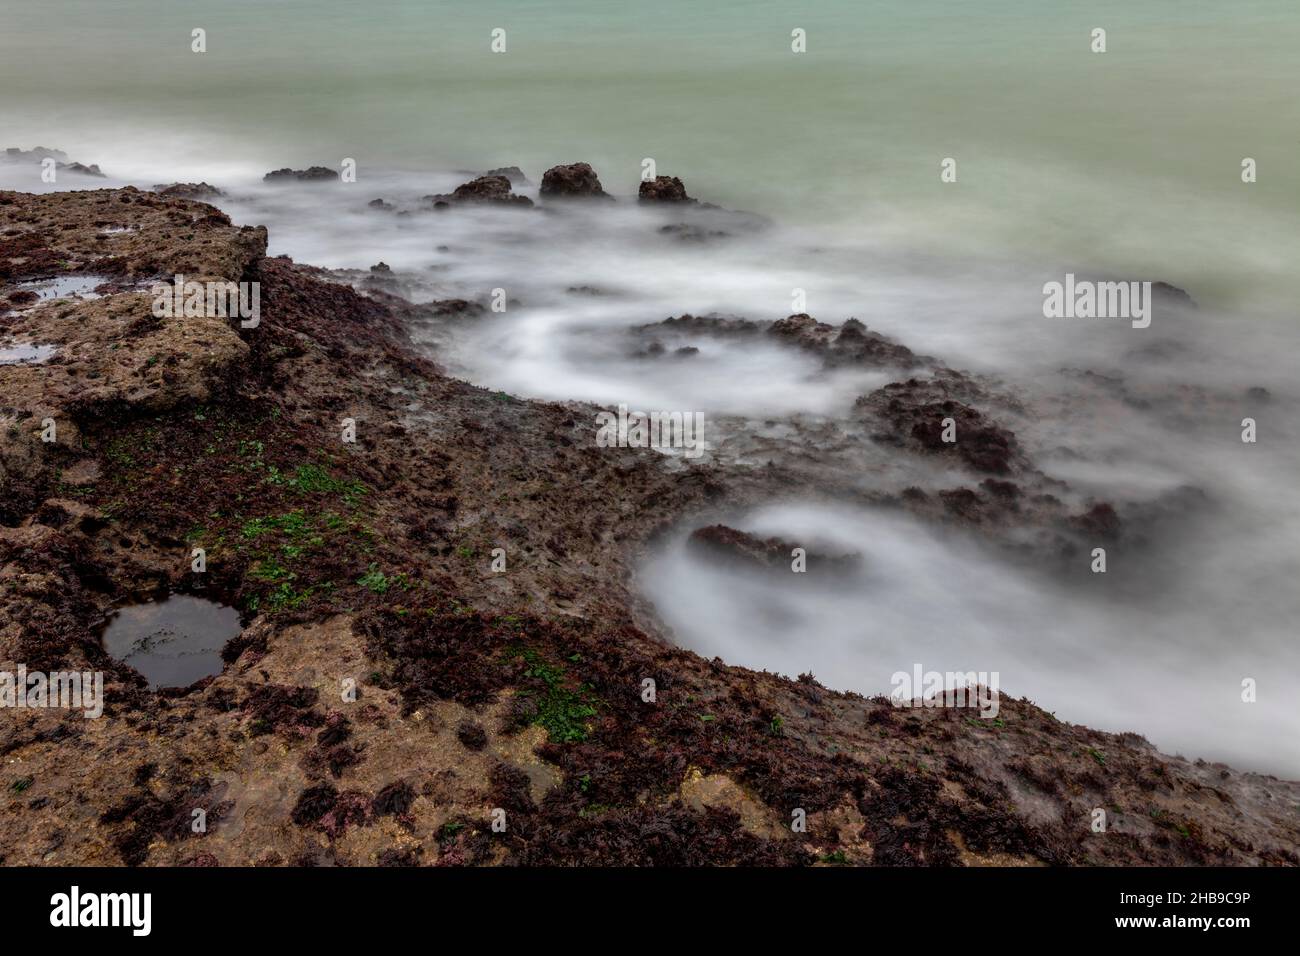 abstract coastal rocky and rugged shoreline of the isle of wight coast, mysterious swirling seas and rugged rocks on isle of wight coastline. Stock Photo